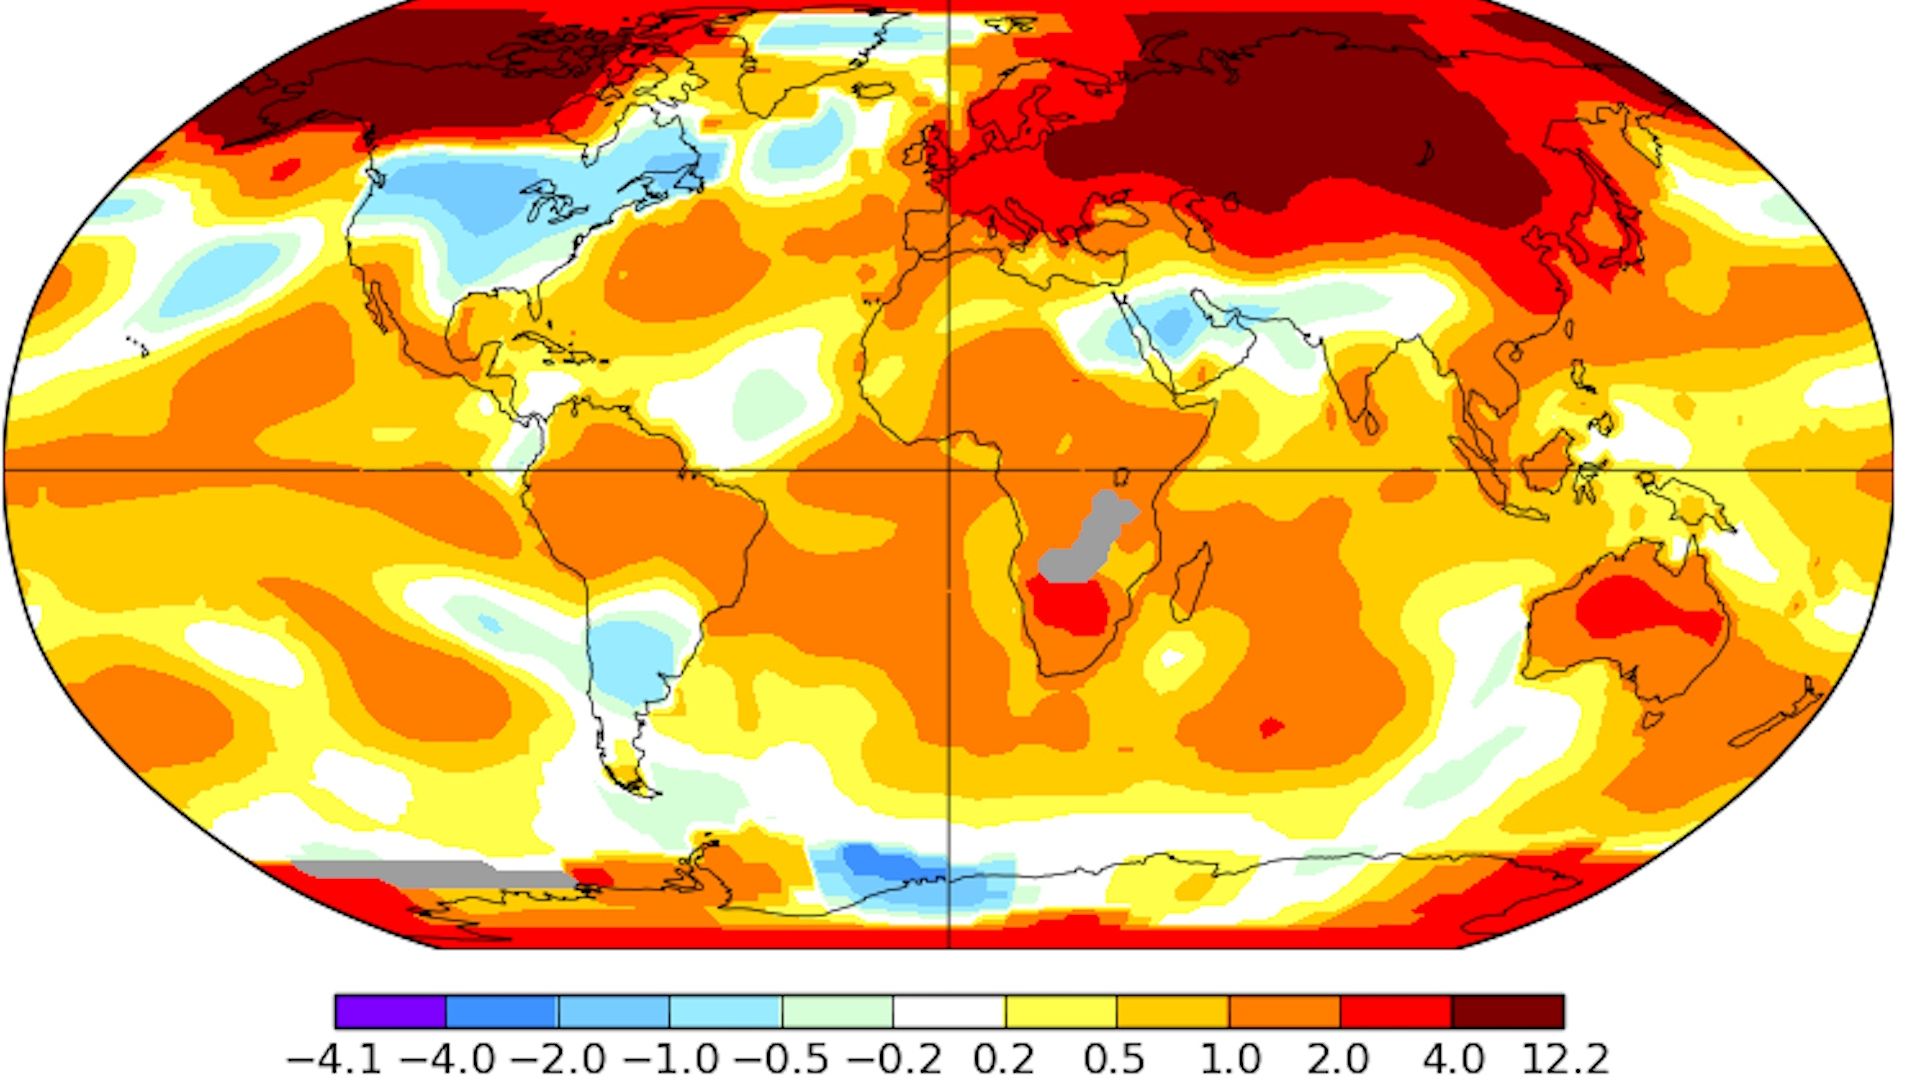 Global average temperature anomalies for March 2019 compared to the 1951-1980 average.